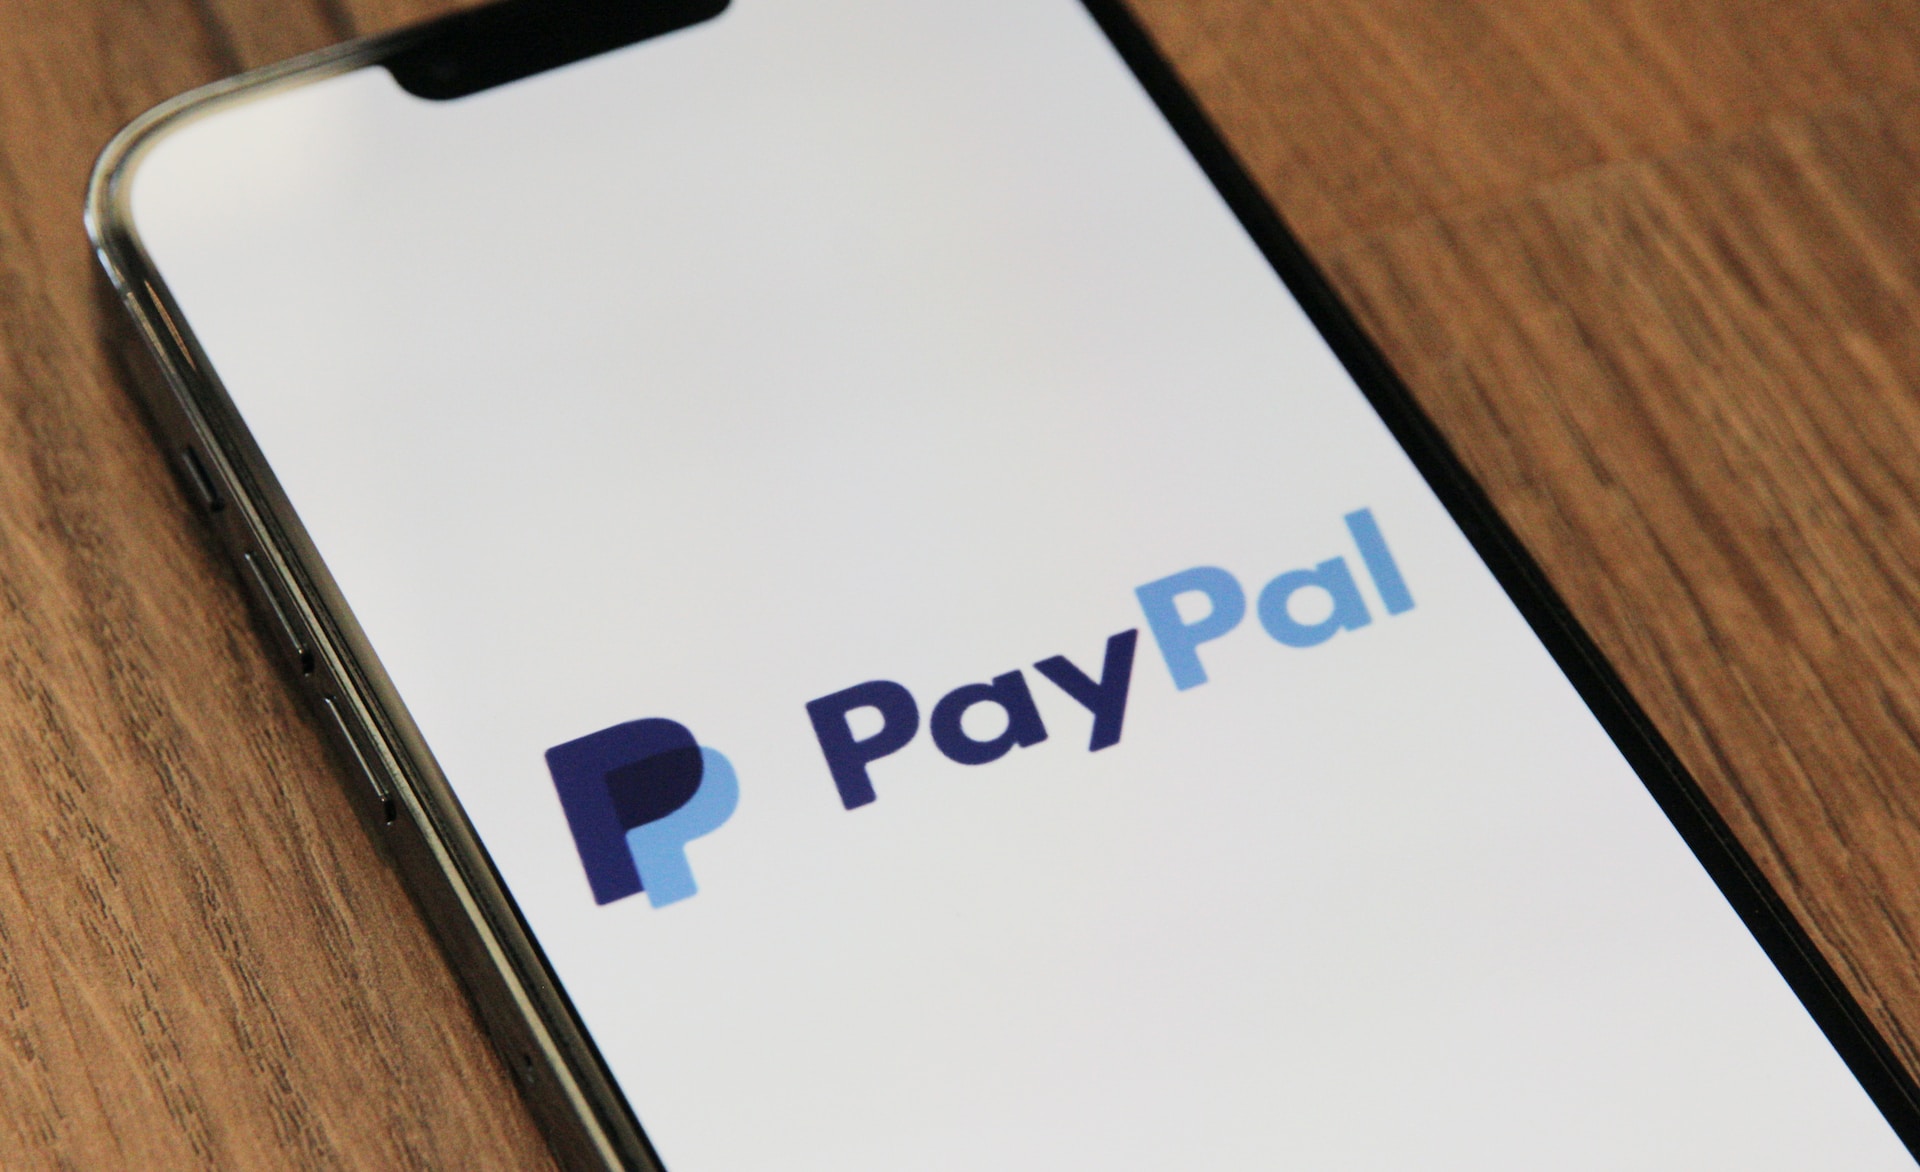 The official PayPal logo on a phone screen